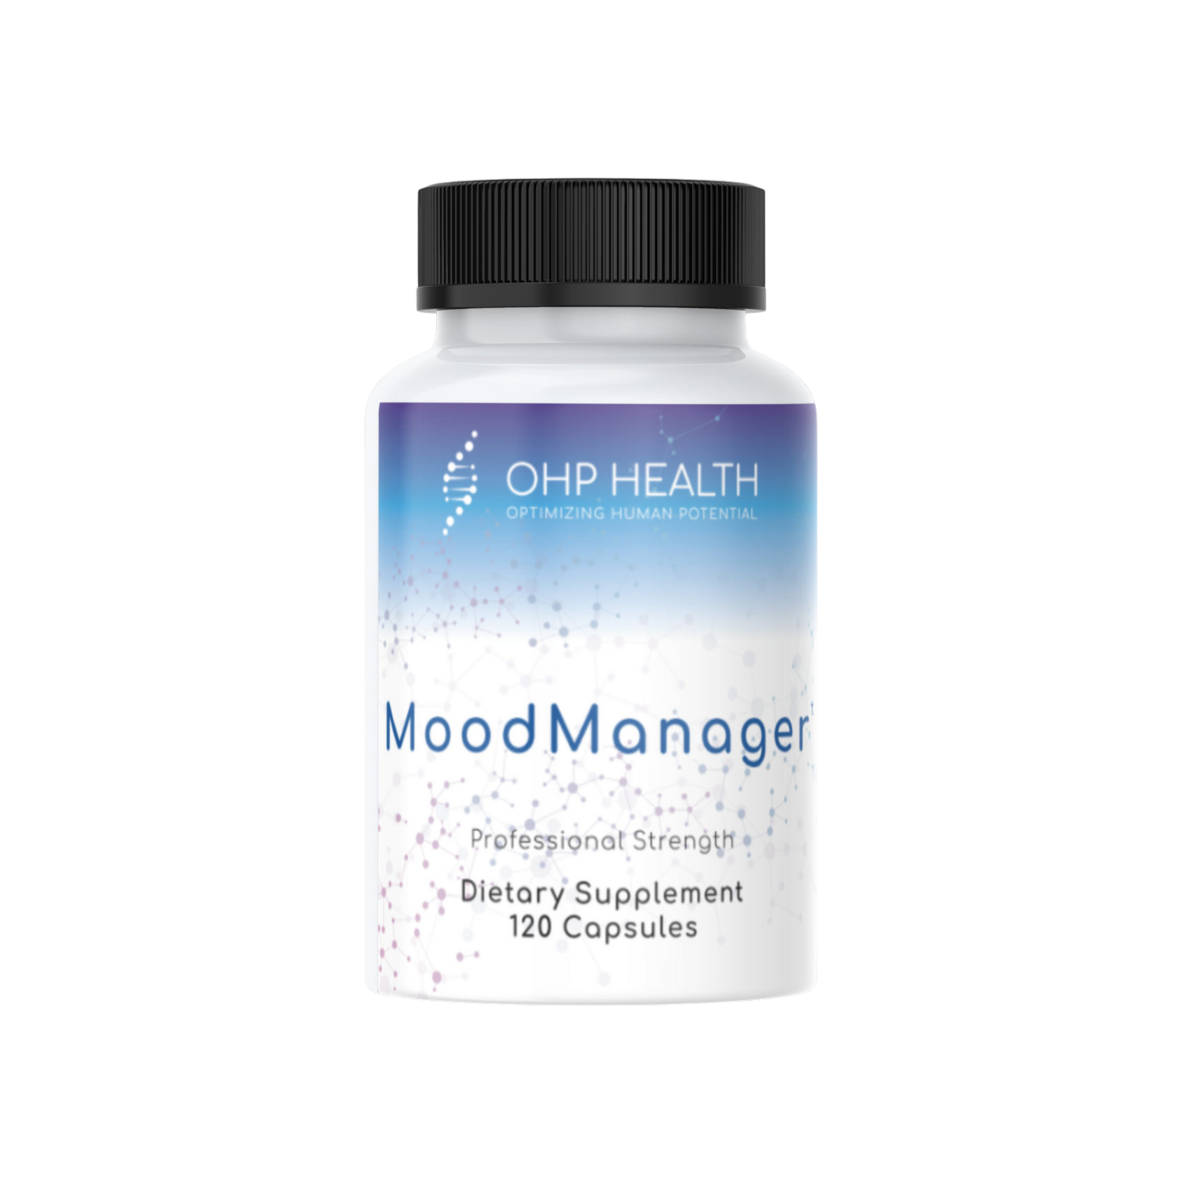 OHP Health Mood Manager | 120 Caps capsules.